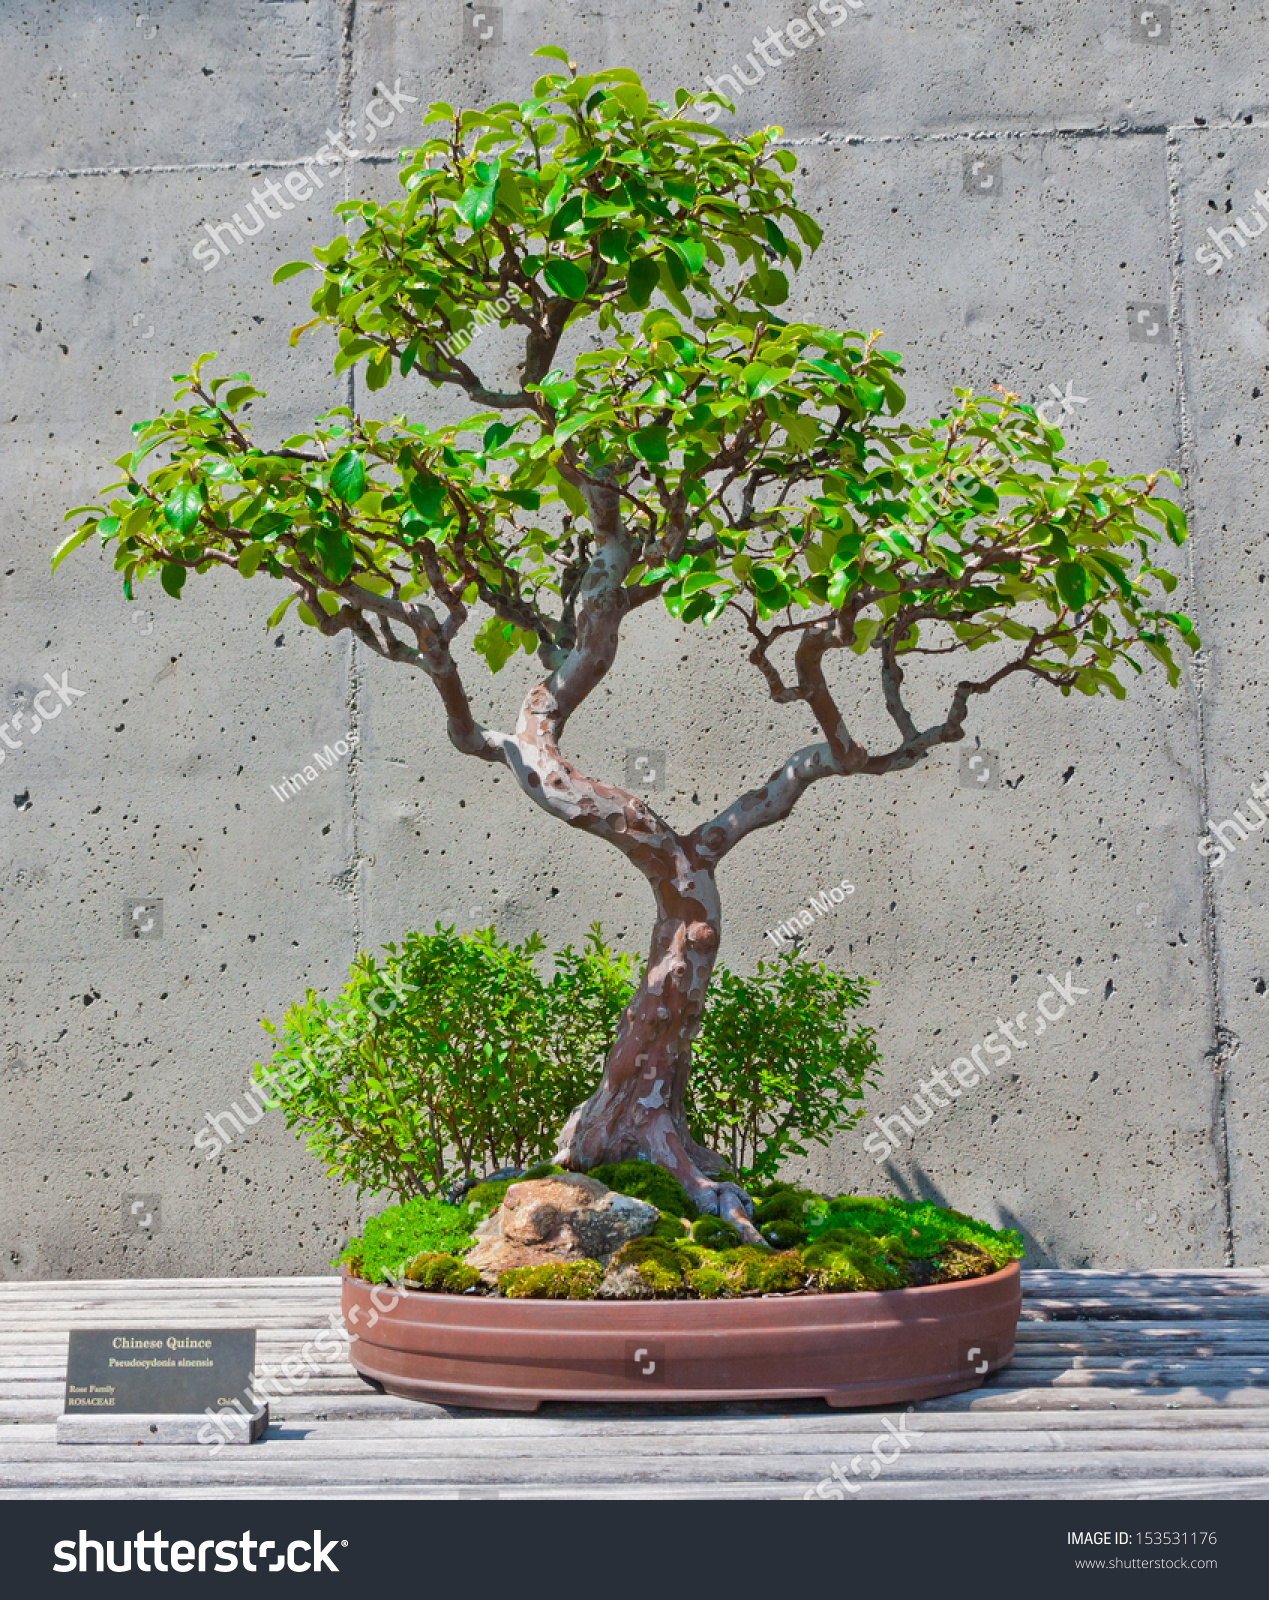 Royalty-free A bonsai miniature of a Chinese Quince … #153531176 ...